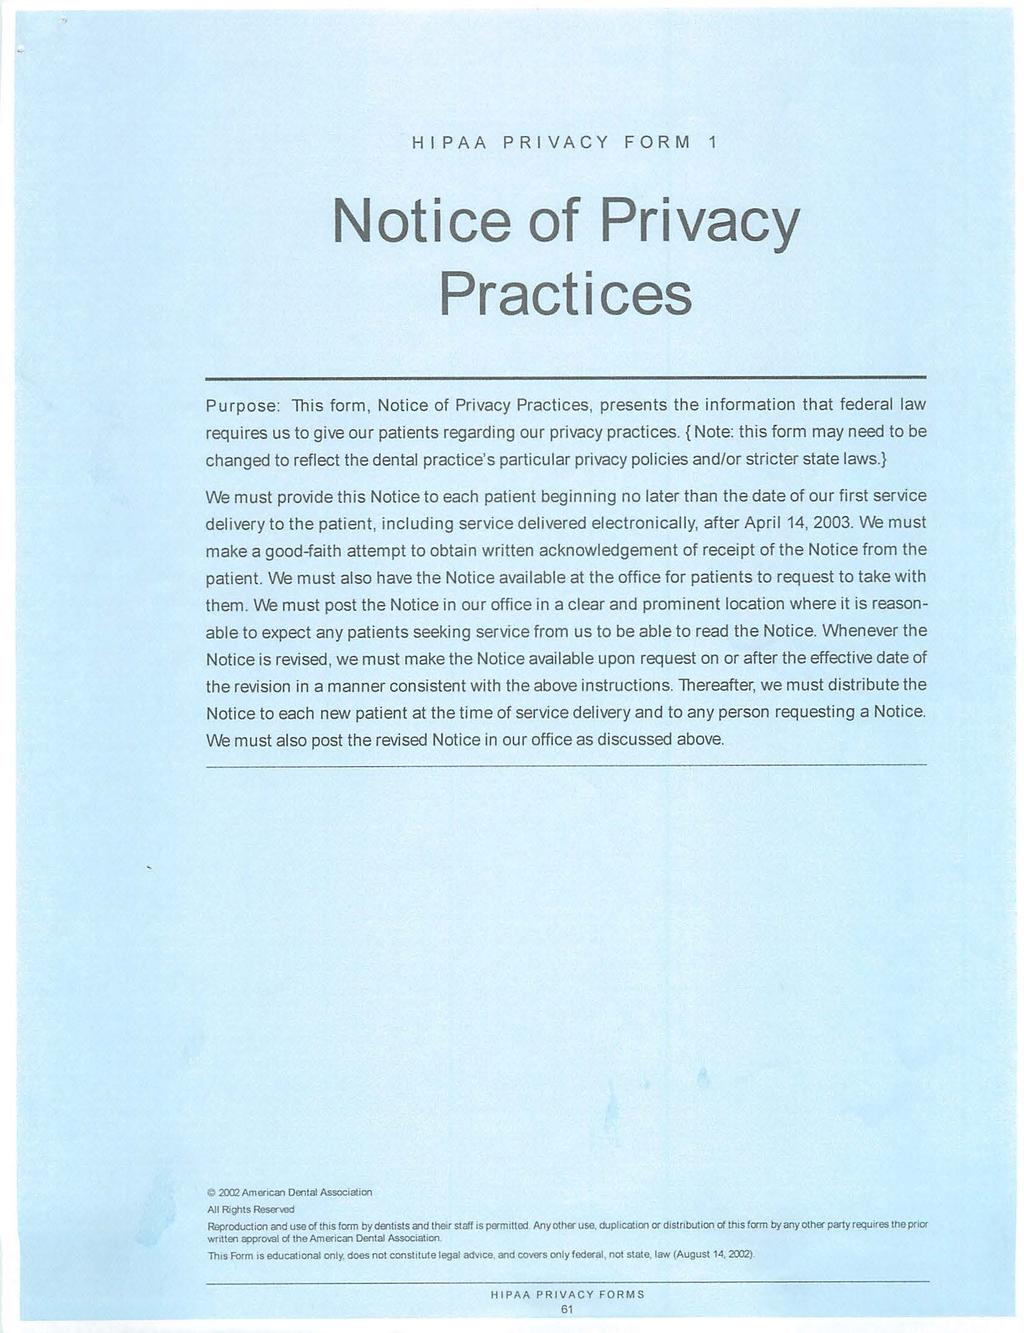 HIPAA PRIVACY FORM 1 tice of Privacy Practices Purpose: This form, tice of Privacy Practices, presents the information that federal law requires us to give our patients regarding our privacy